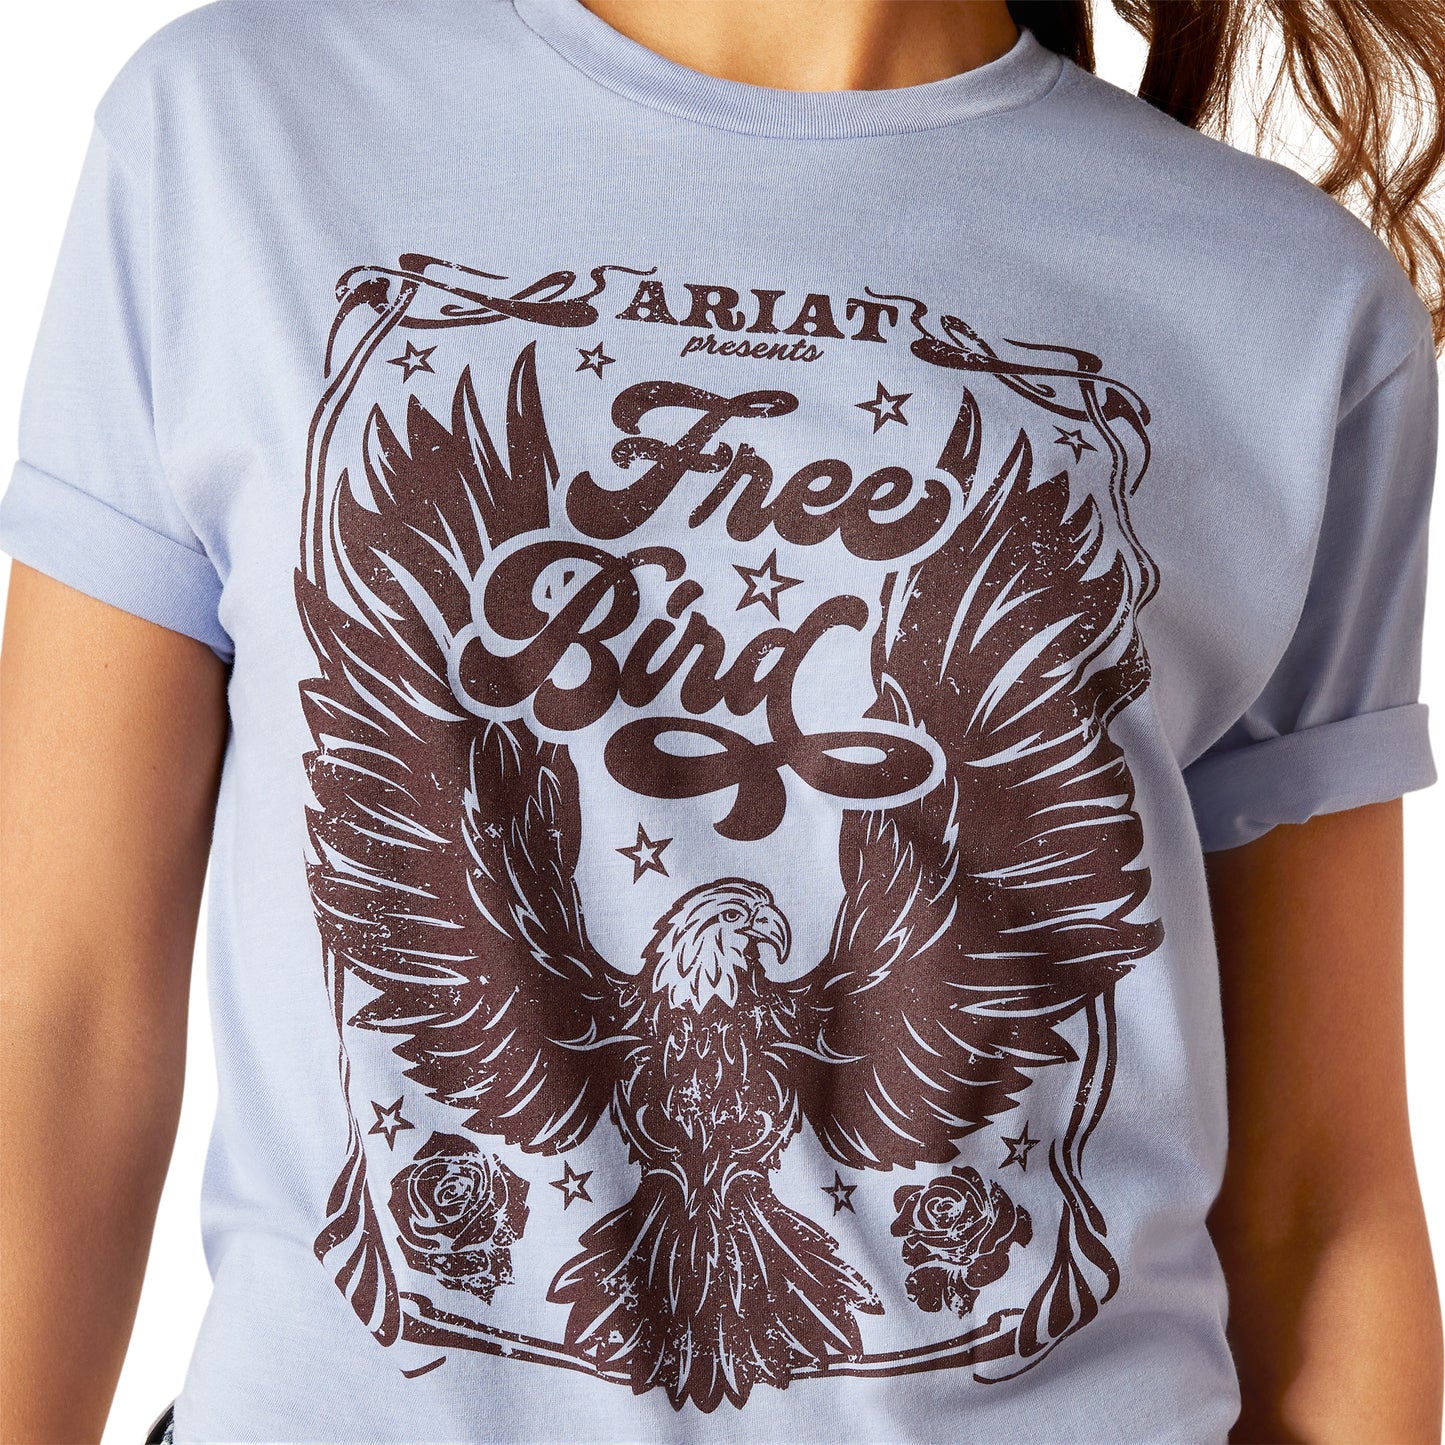 Ariat Ladies American Free Orchid Heather T-Shirt 10047601